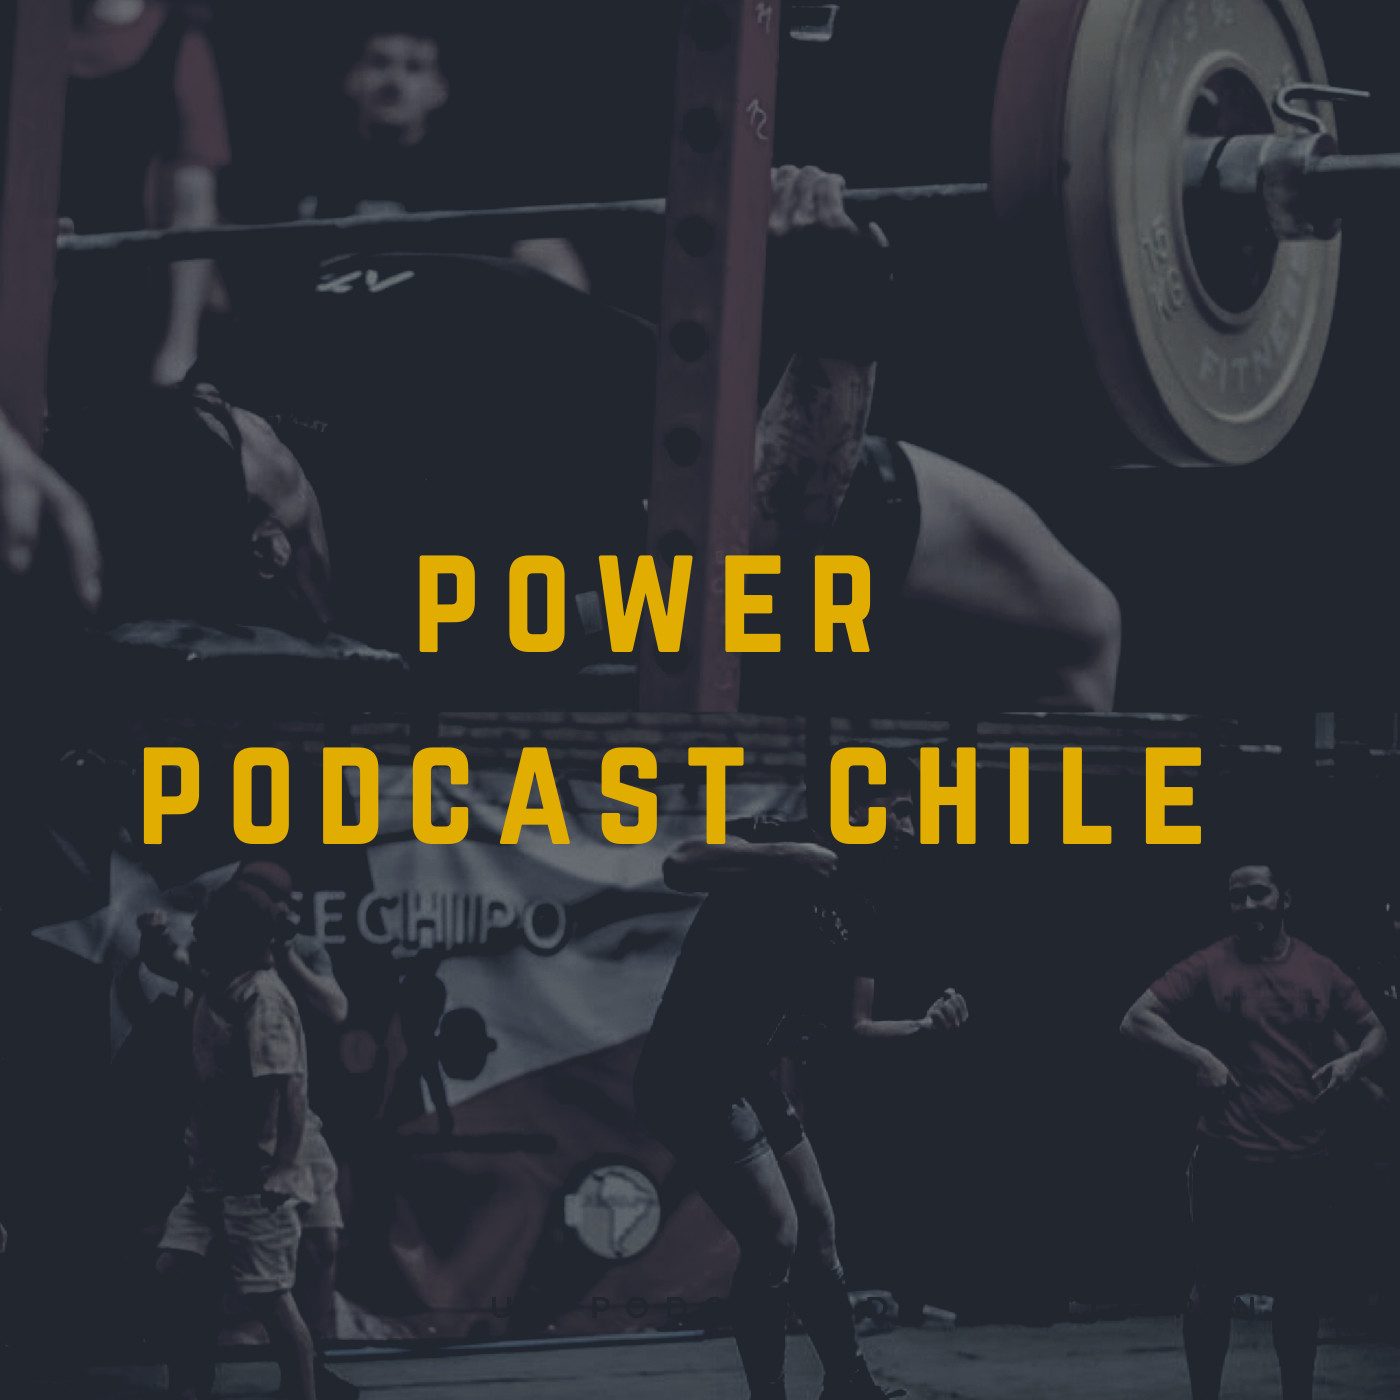 PowerPodcast Chile